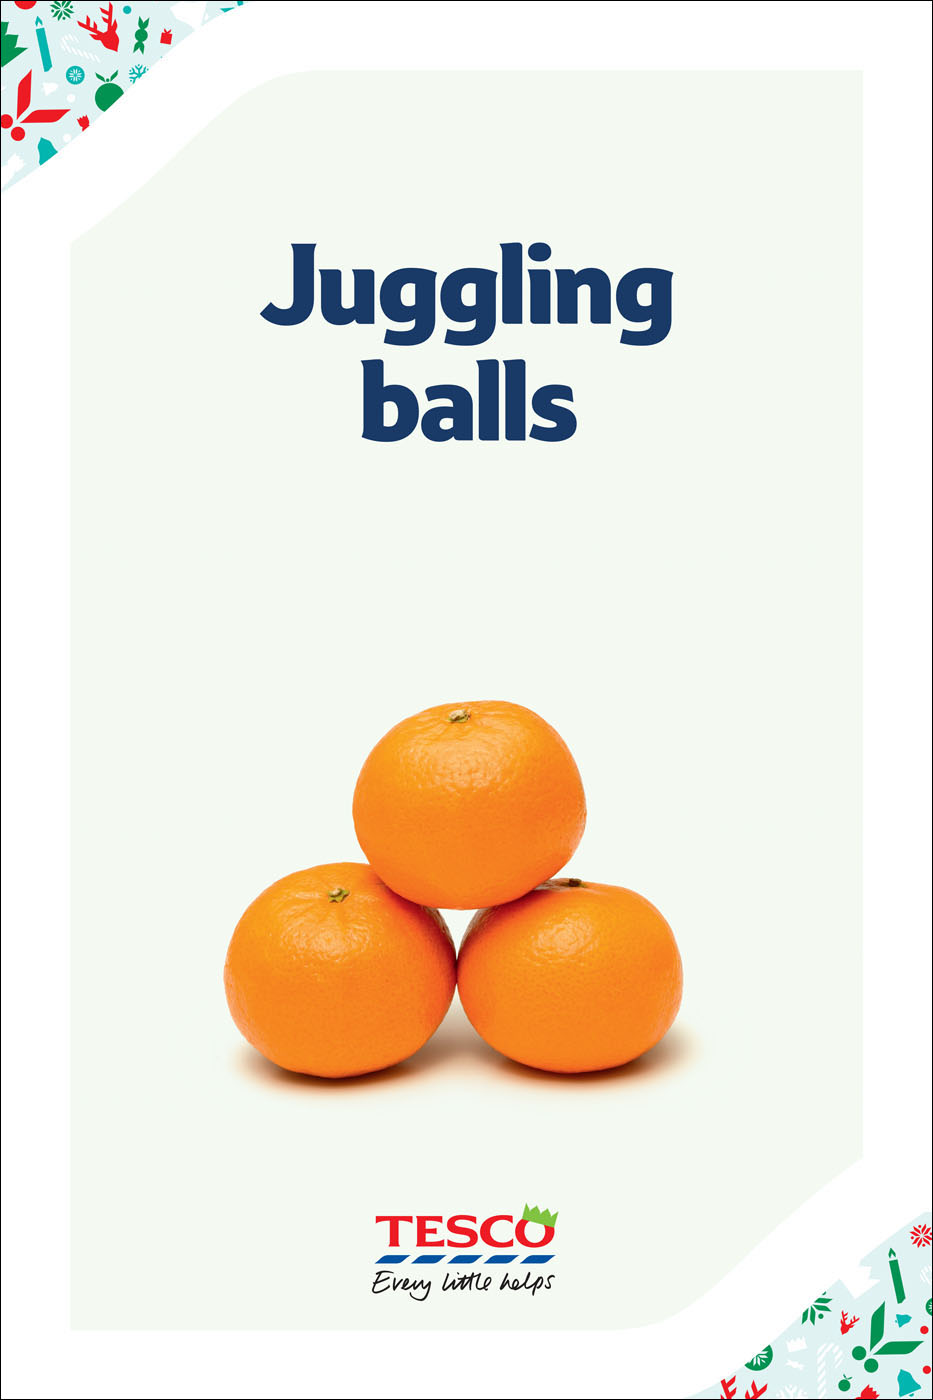 Clementine juggling balls by Alexander Kent London based still life and product photographer.